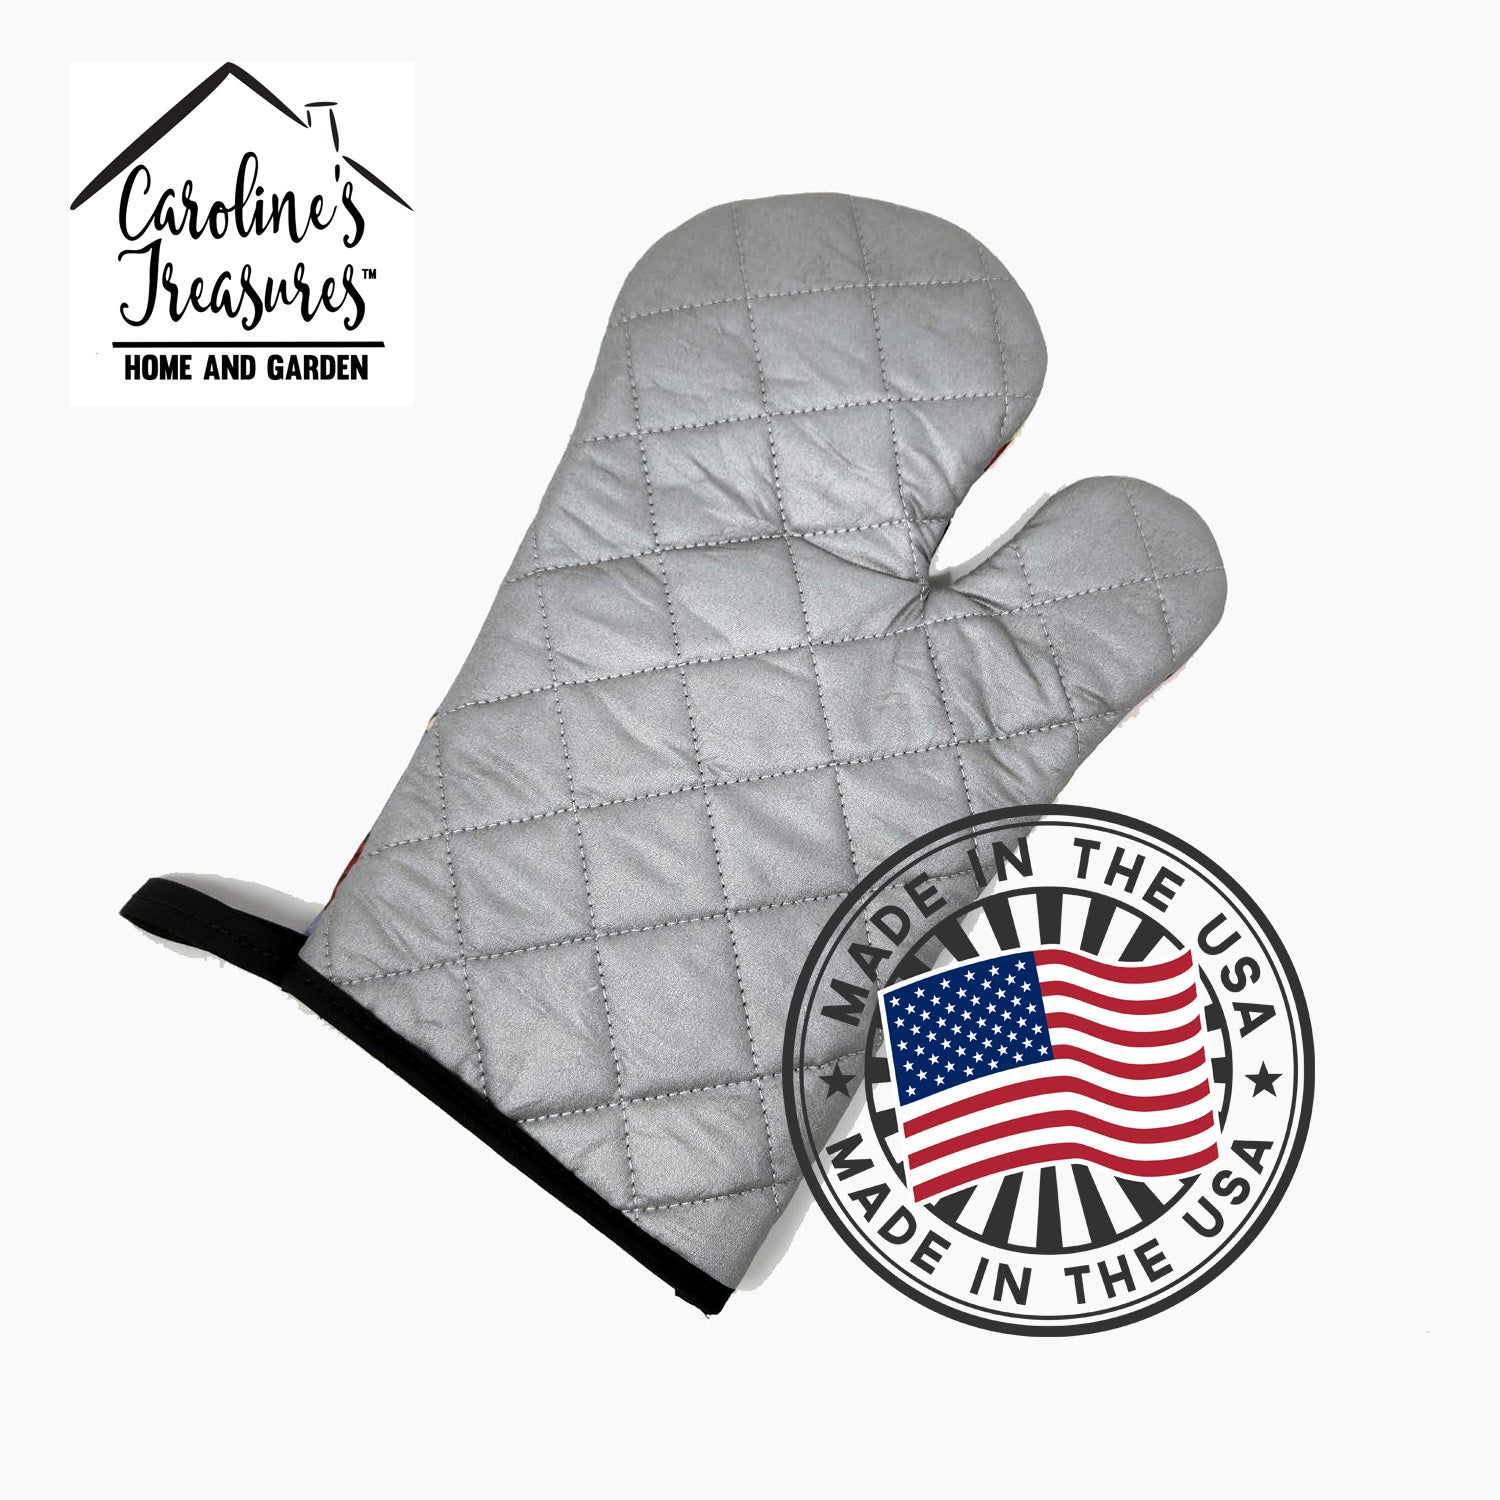 Chinese Crested Oven Mitt SS8185OVMT